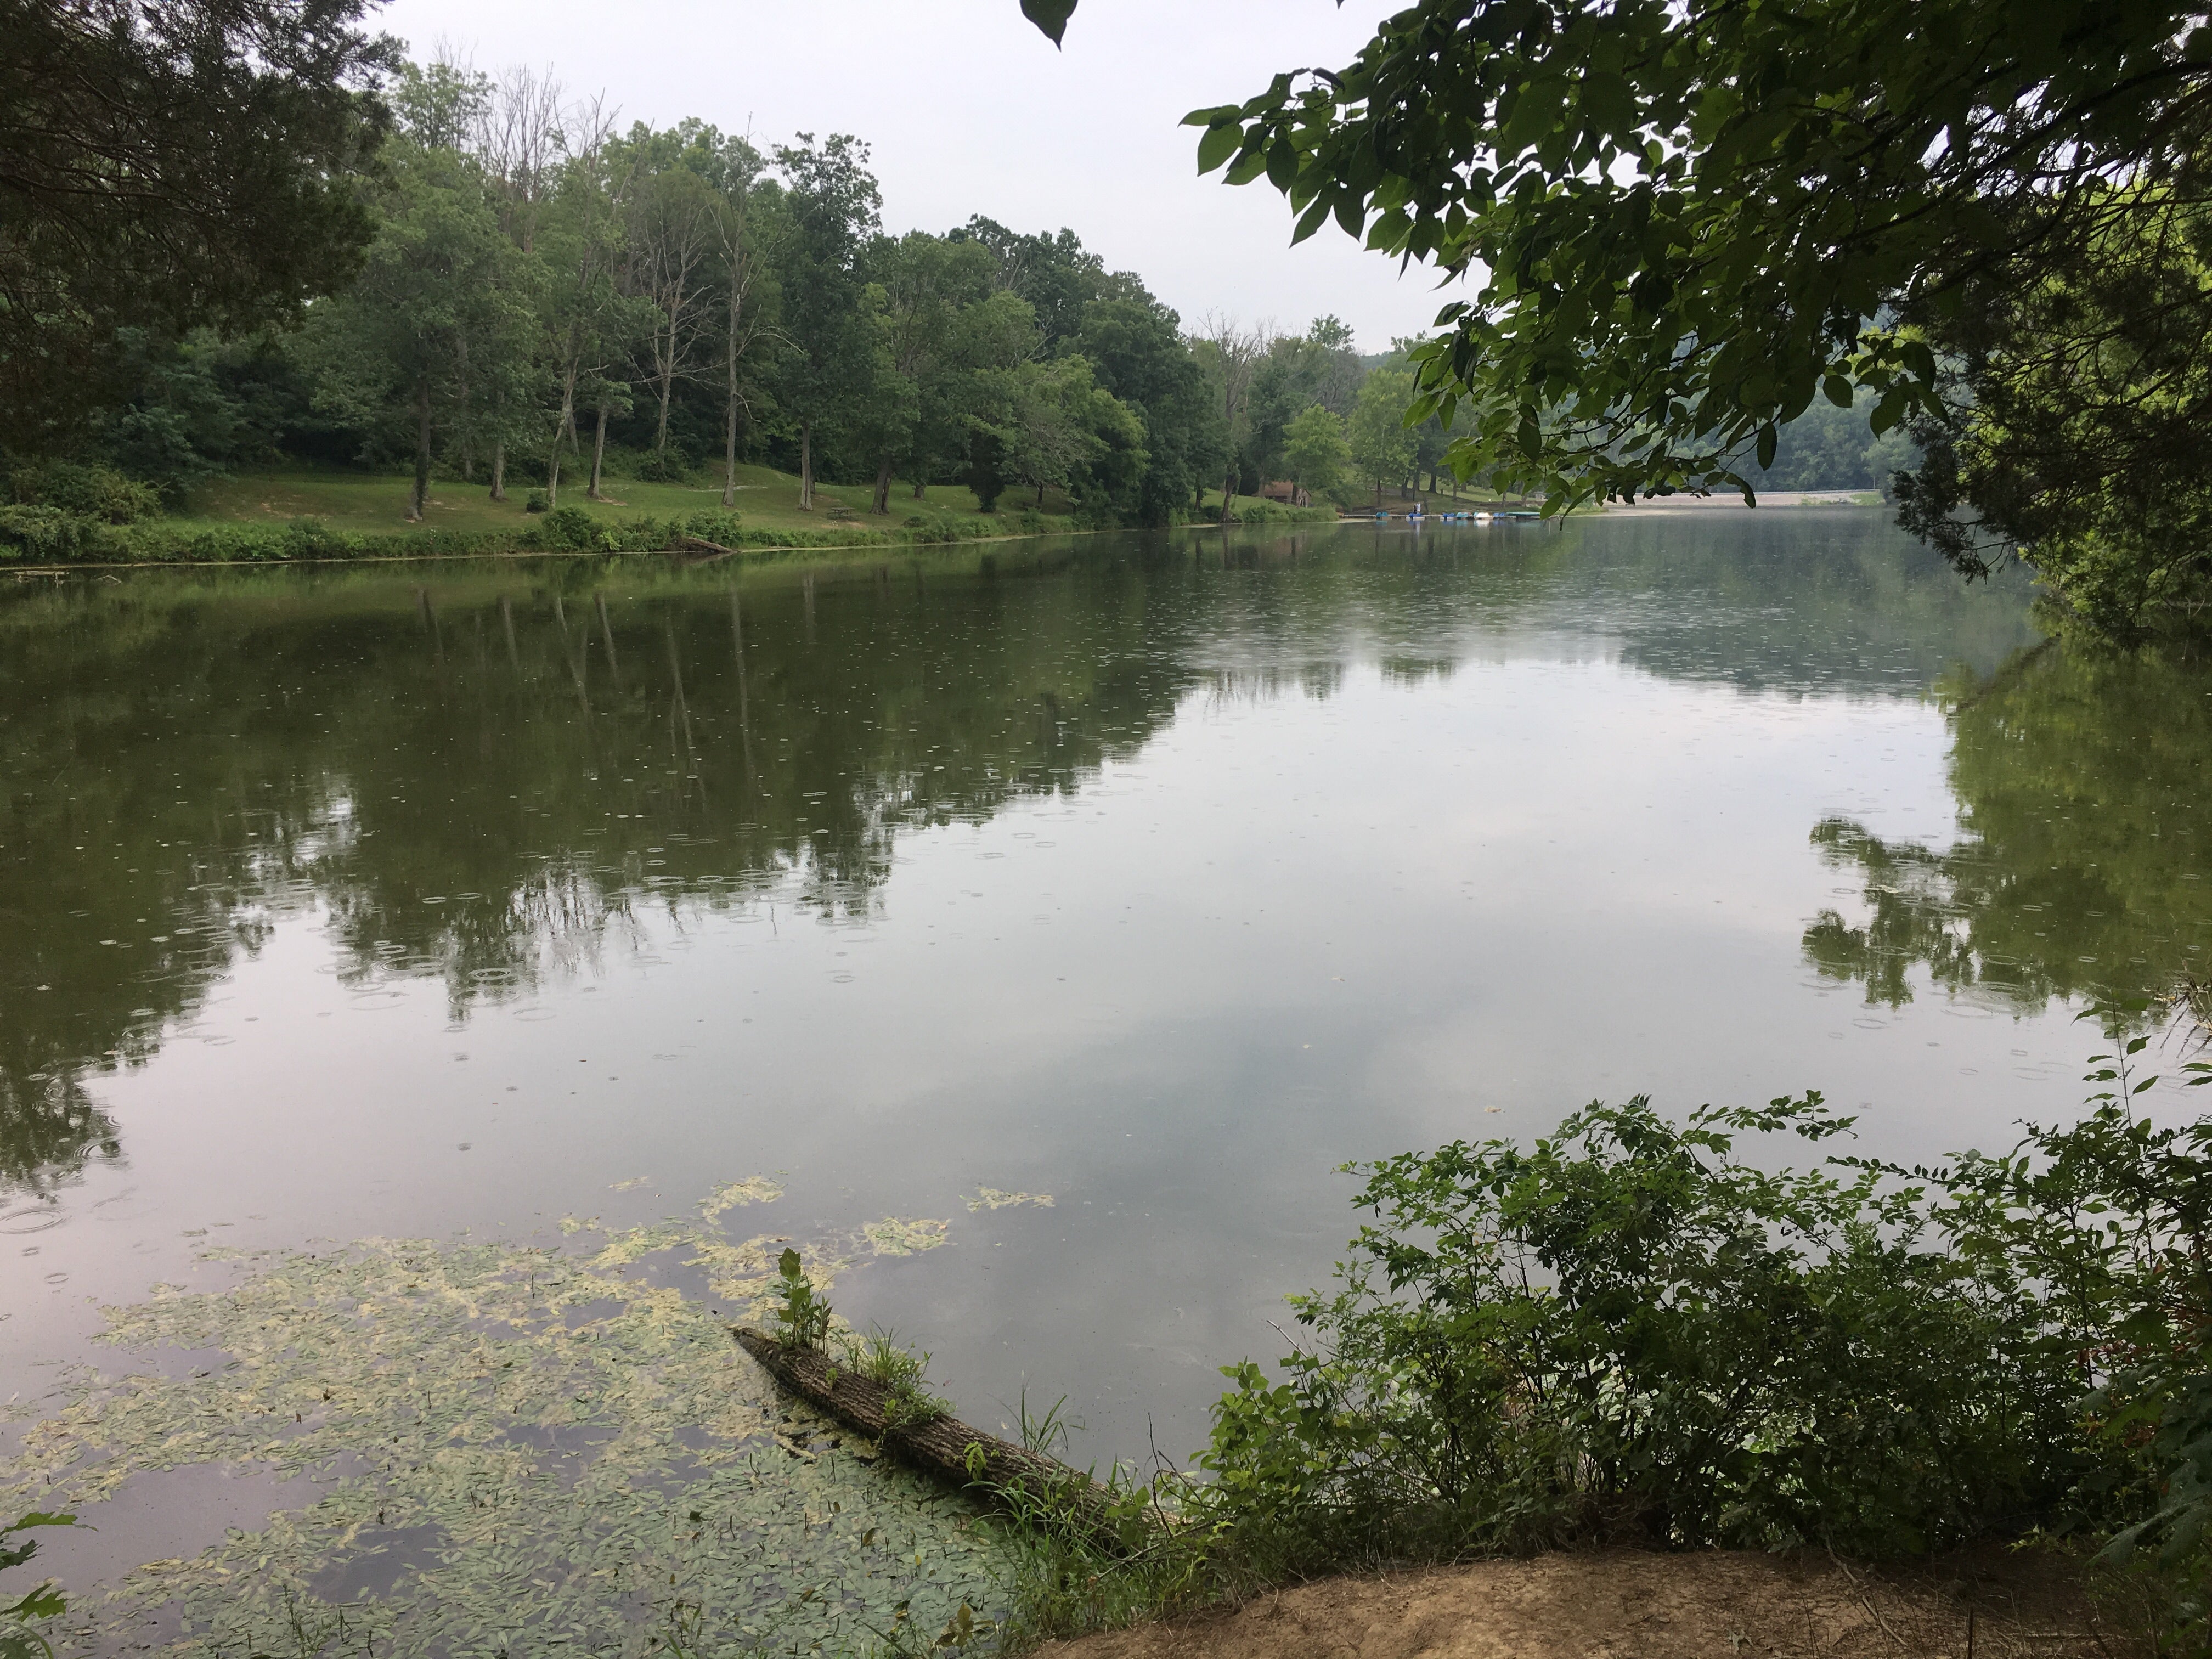 30acre fishing pond. Also have non-motorized boat rental.